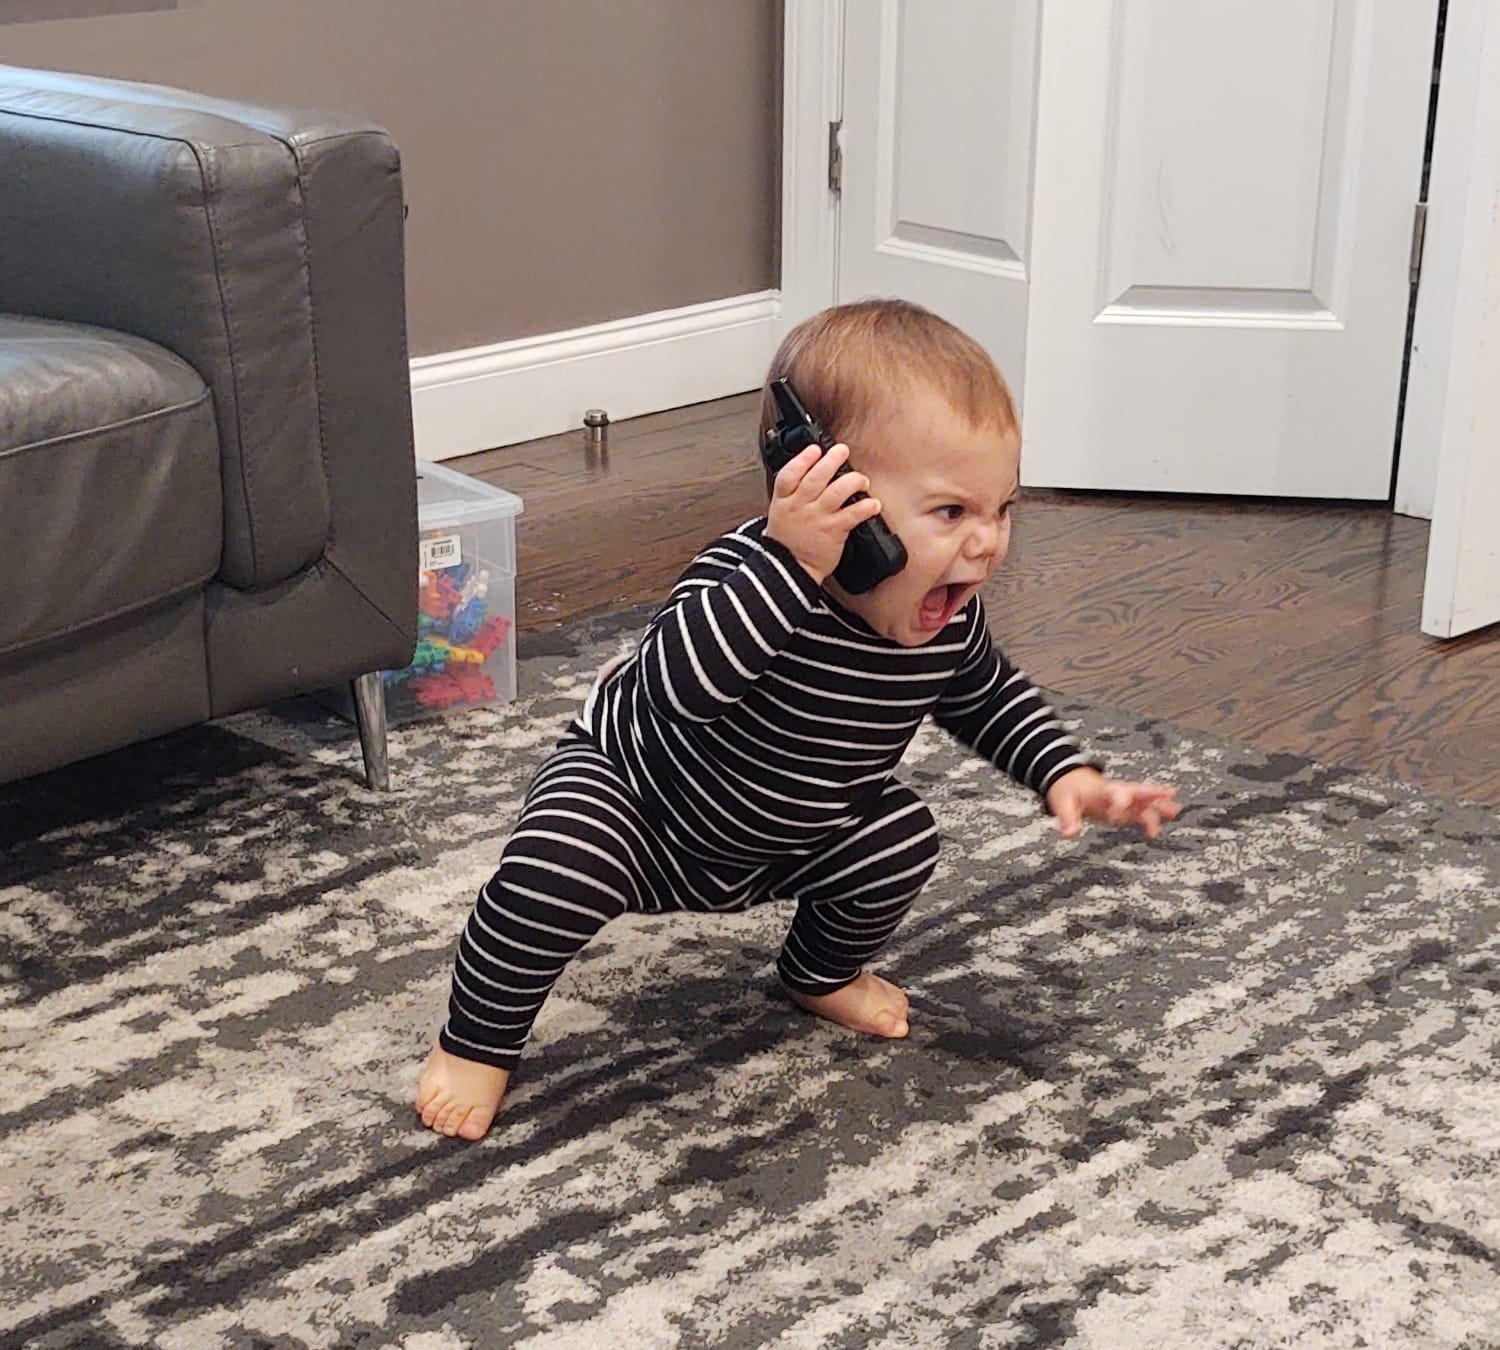 High Quality baby screams into phone Blank Meme Template